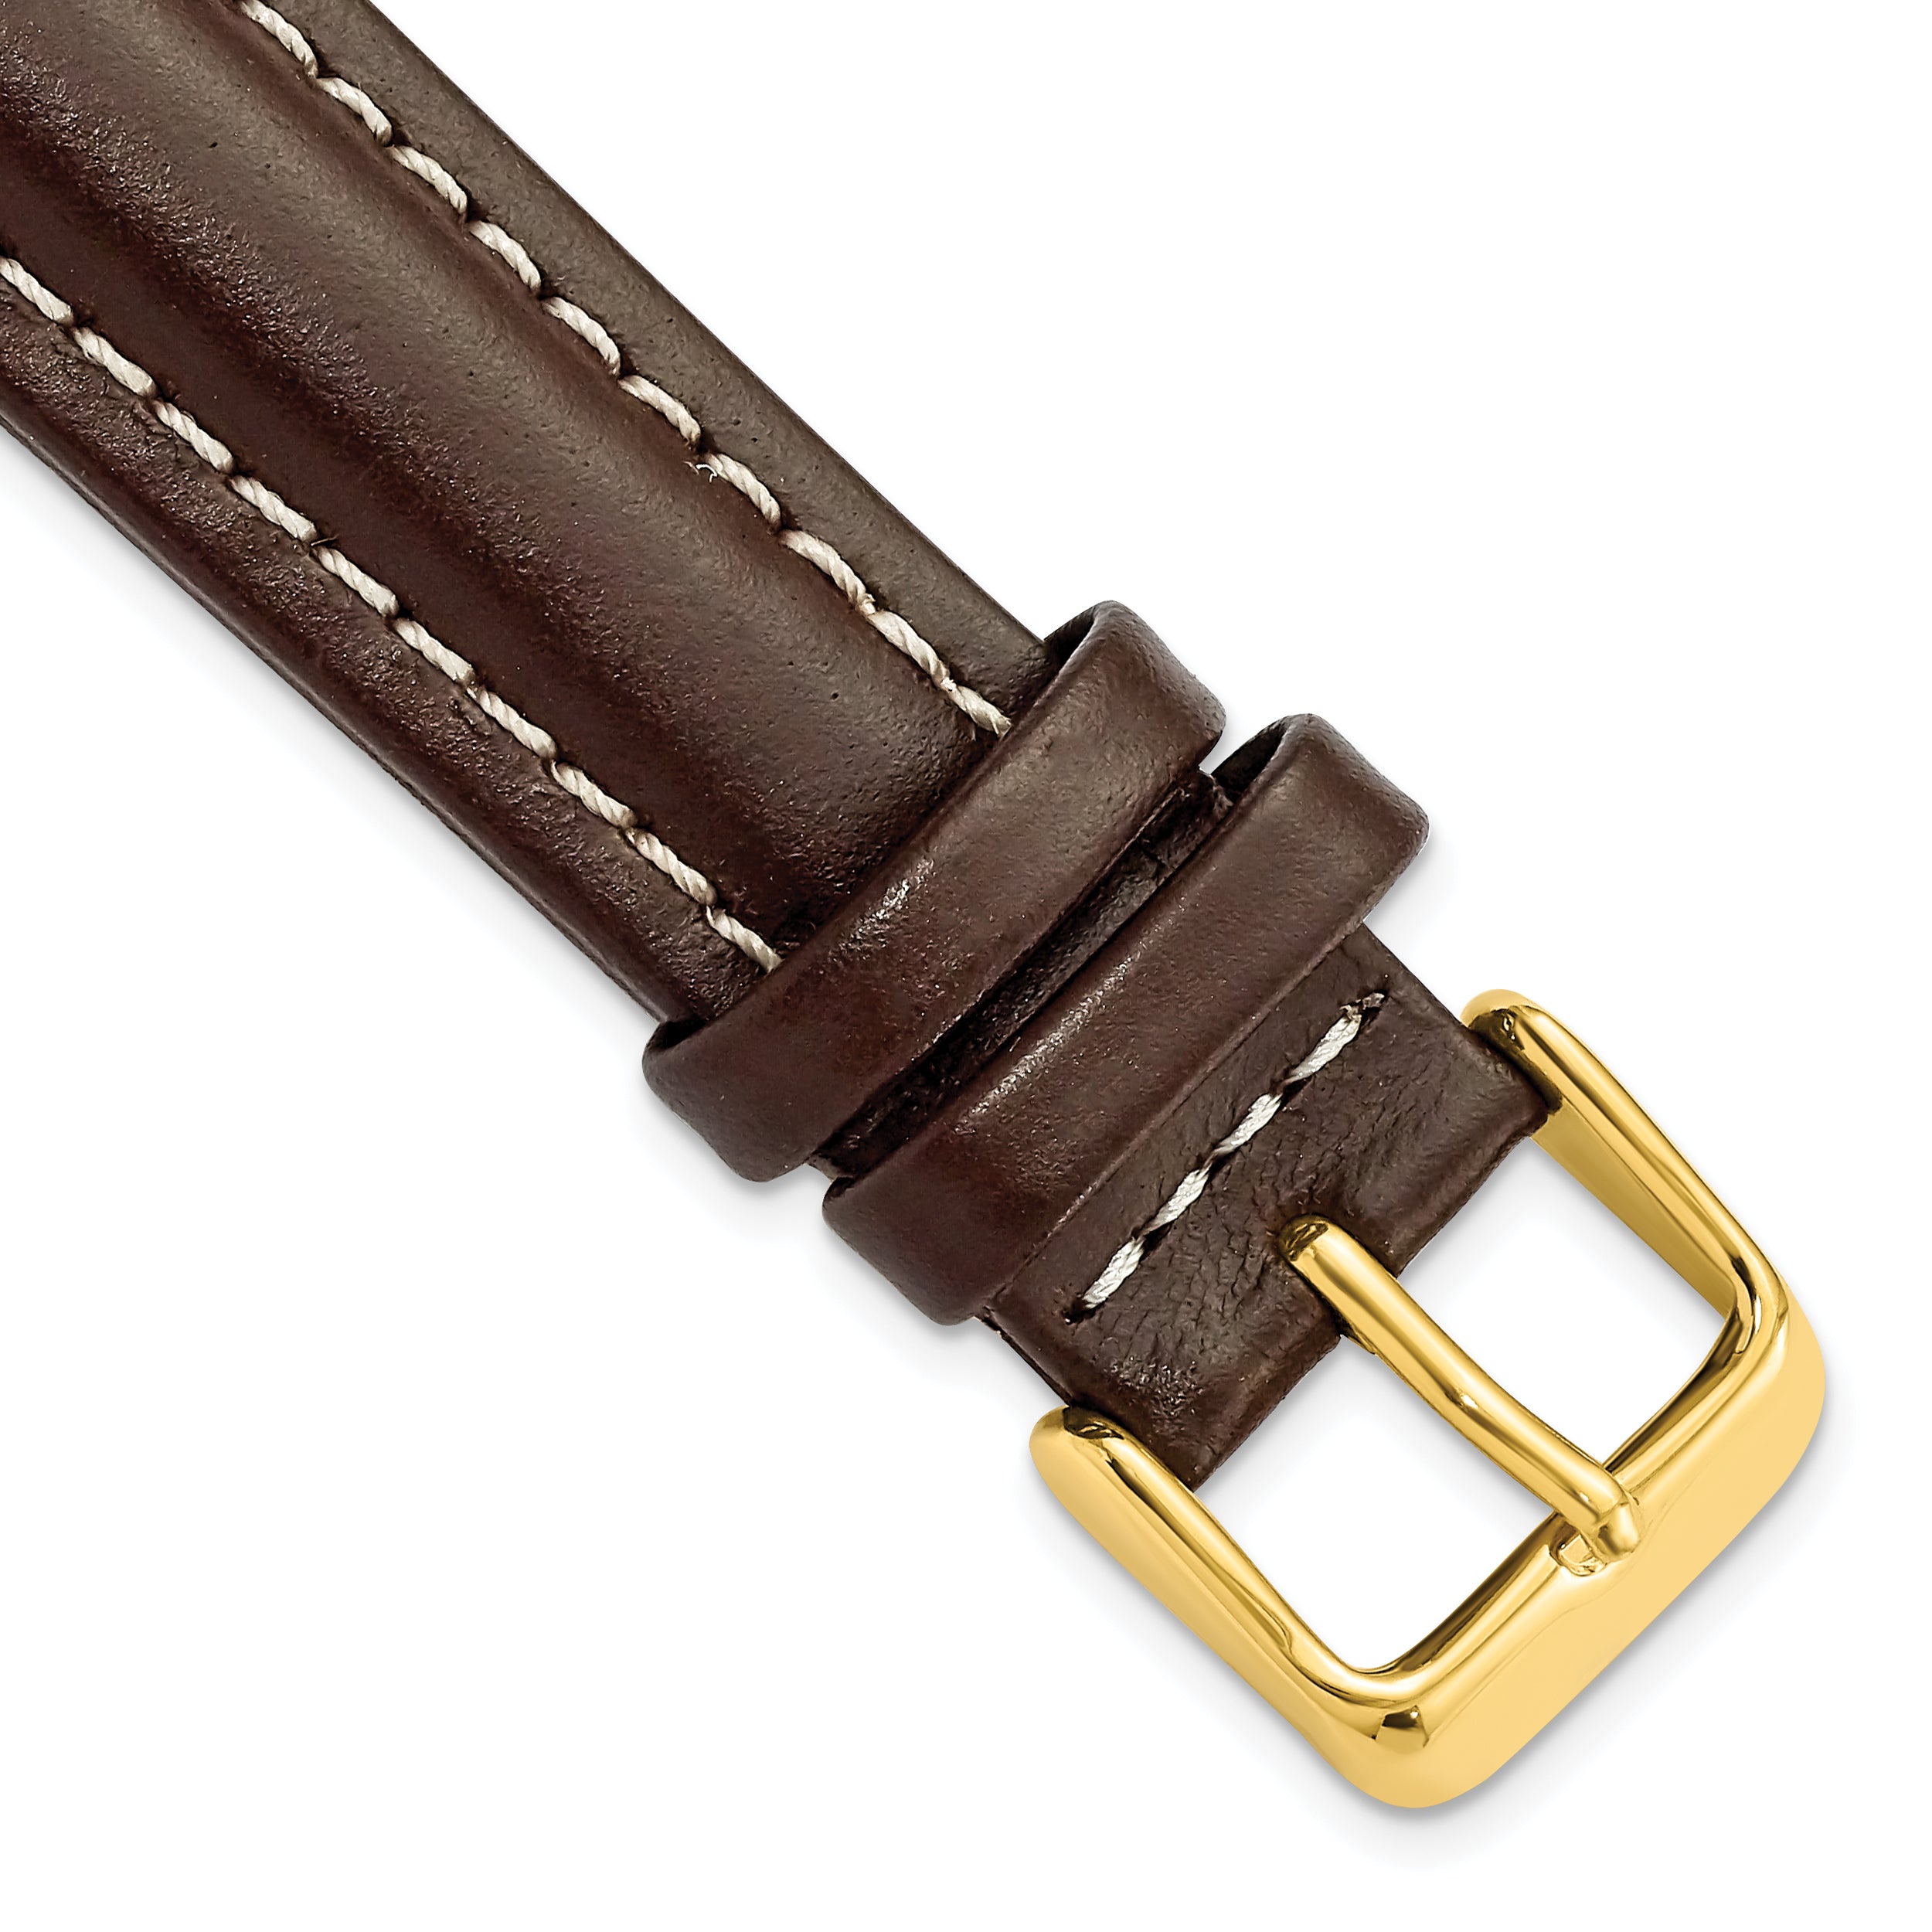 DeBeer 18mm Dark Brown Oil-tanned Leather with White Stitching and Gold-tone Buckle 7.5 inch Watch Band